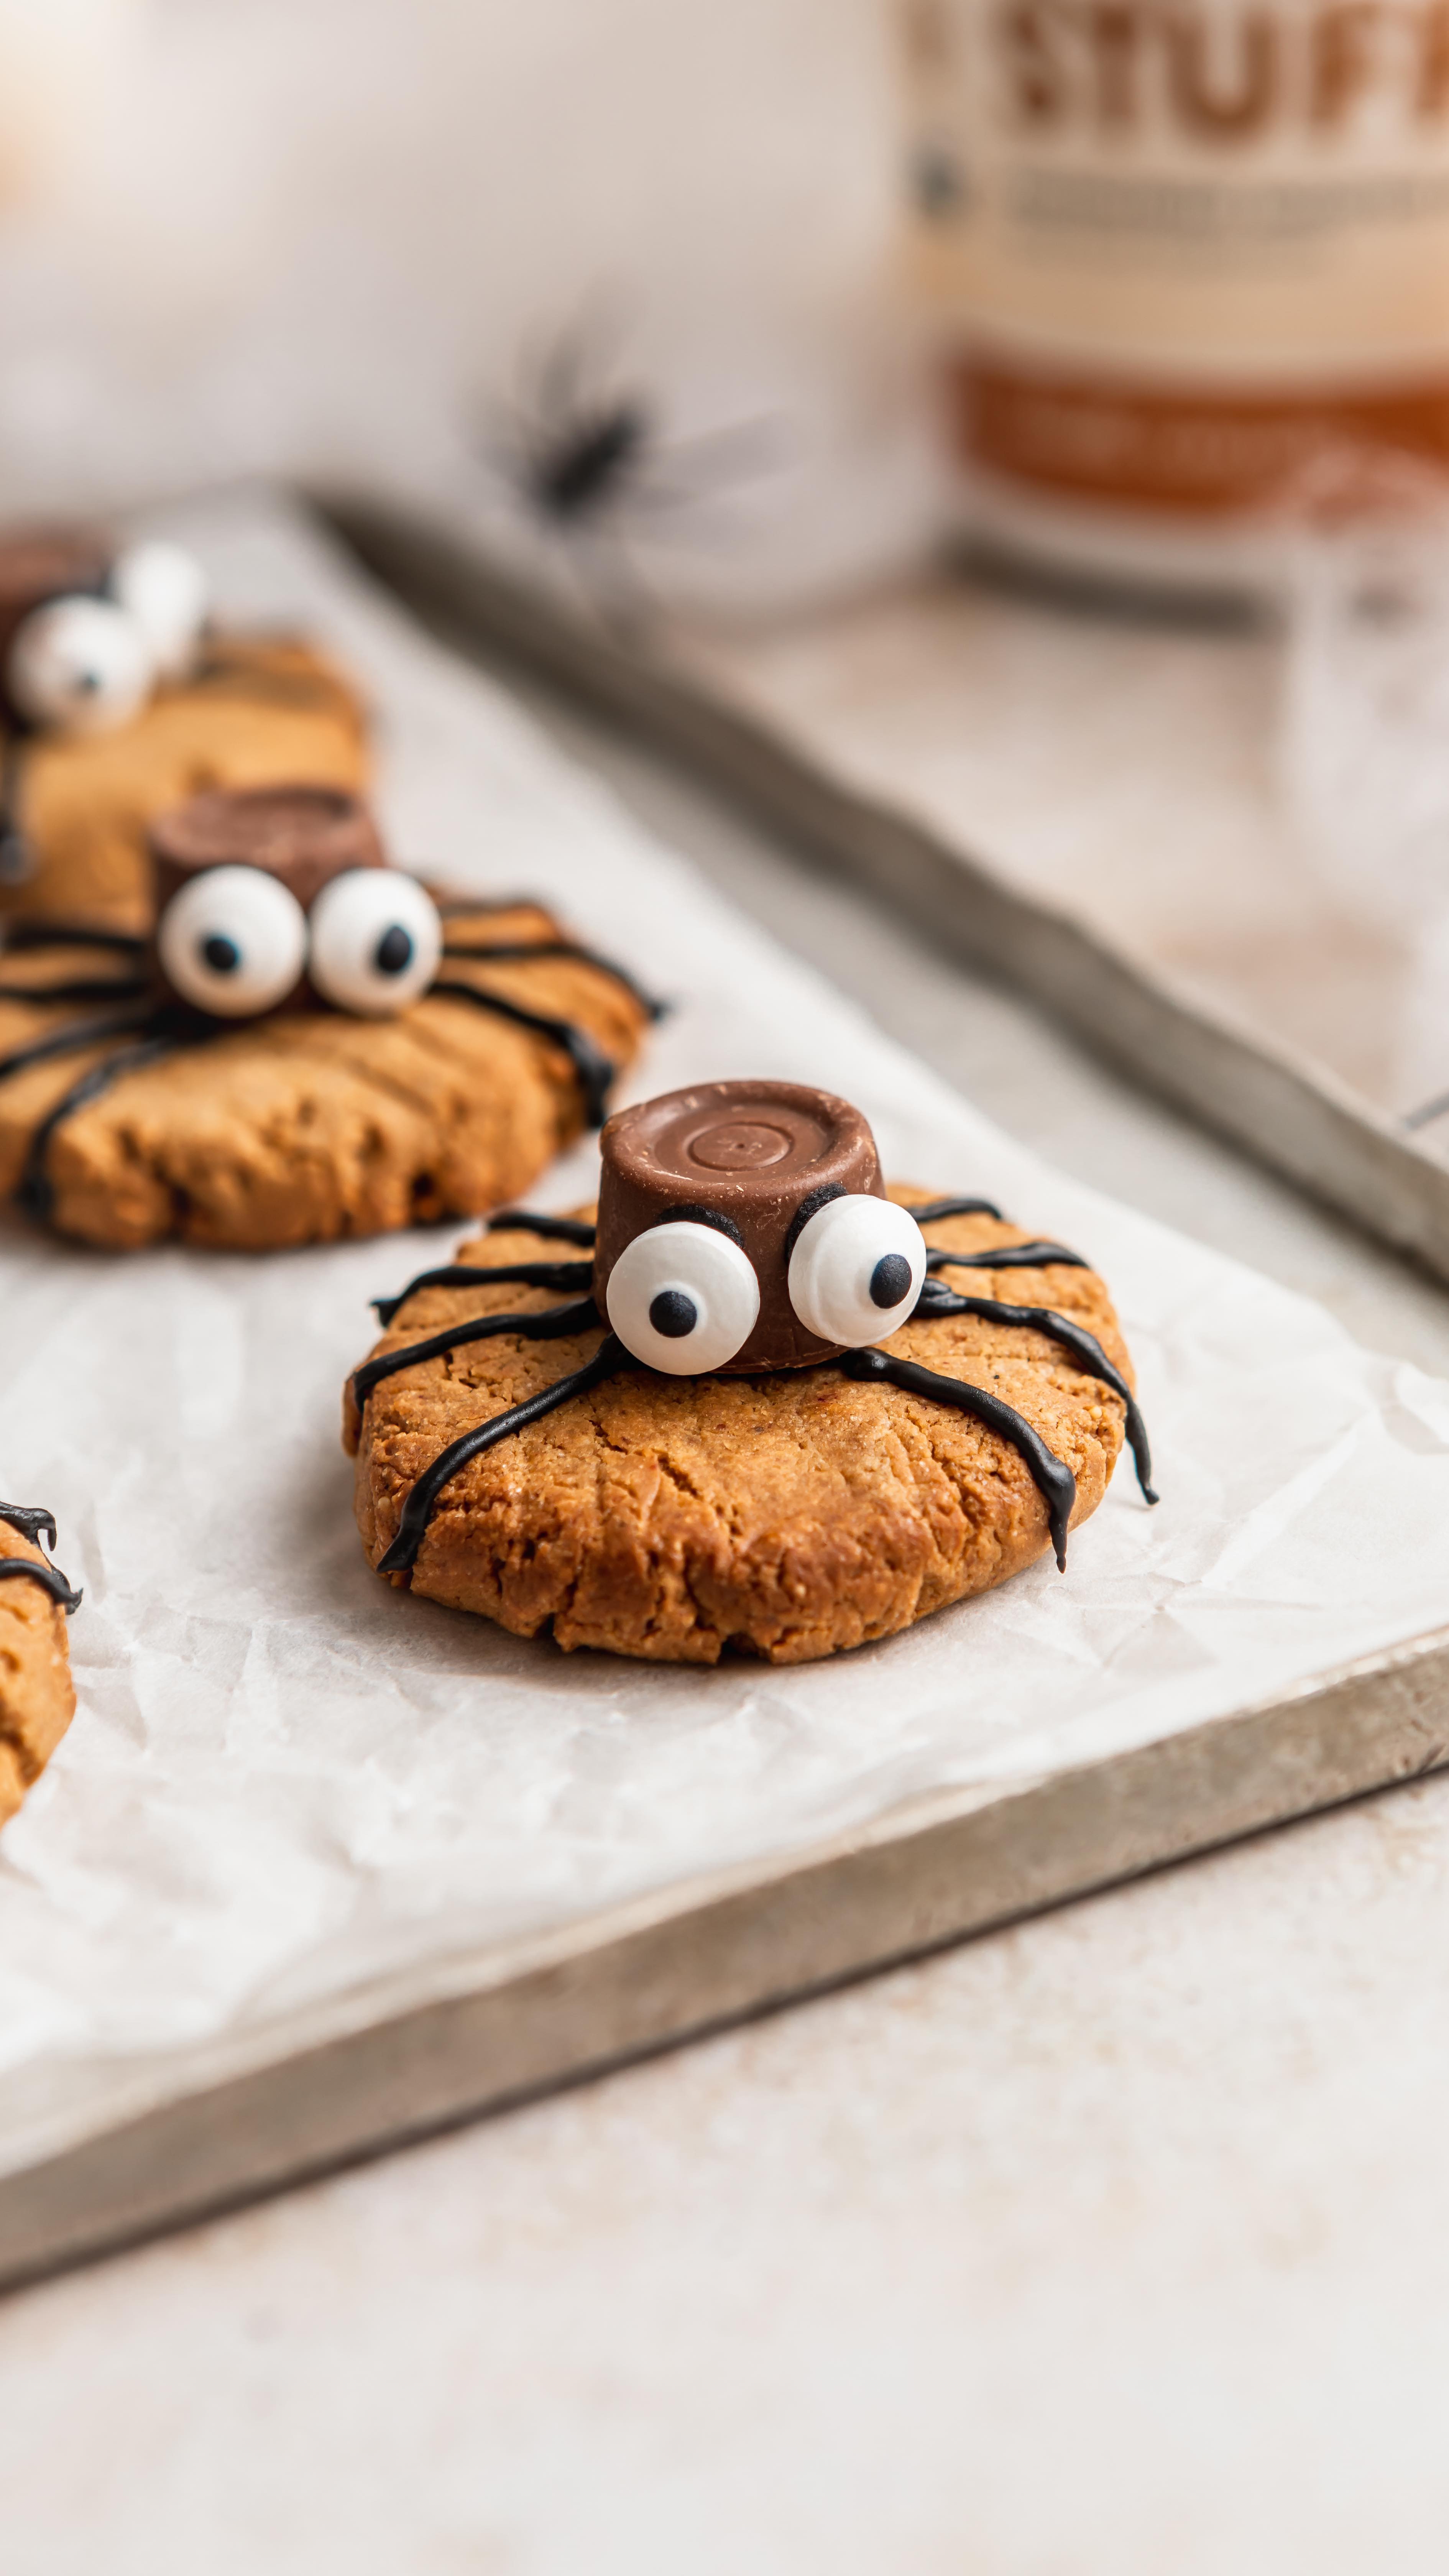 SPIDER ROLO COOKIES 🕷 

Fancy some Halloween baking this weekend? Then make sure you hit SAVE to give these spider Rolo cookies a go!

Serves 6
Ready in 30 mins

INGREDIENTS

115g smooth peanut butter
40g light muscovado sugar
1 large egg
15g vanilla protein powder
15g plain flour (or GF oat flour)
To Decorate-
Black Writing Icing
Edible Eyes
6 Rolos

METHOD

1. Preheat the oven to 180°c and line a small baking tray with parchment.
2. To a bowl, add the peanut butter, sugar, egg, protein powder and flour and stir until a thick dough forms.
3. Roll the dough into 6 even balls and place spaced out onto the prepared baking tray. Flatten each ball into a disc with the back of a form or with your hands.
4. Bake for 10-12 minutes until golden. Place the cookies on a wire rack to cool completely.
5. Once cool, blob a little icing onto the centre of each cookie and place a Rolo on top. Use the icing to draw 8 spider legs coming off the Rolo. Finally blob a little icing on the back of each eye and secure onto the Rolo.

Per Cookie-
Kcal 153
Fat 9
Carbs 12
Protein 6g
#halloweenreels #halloweenrecipes #rolocookies